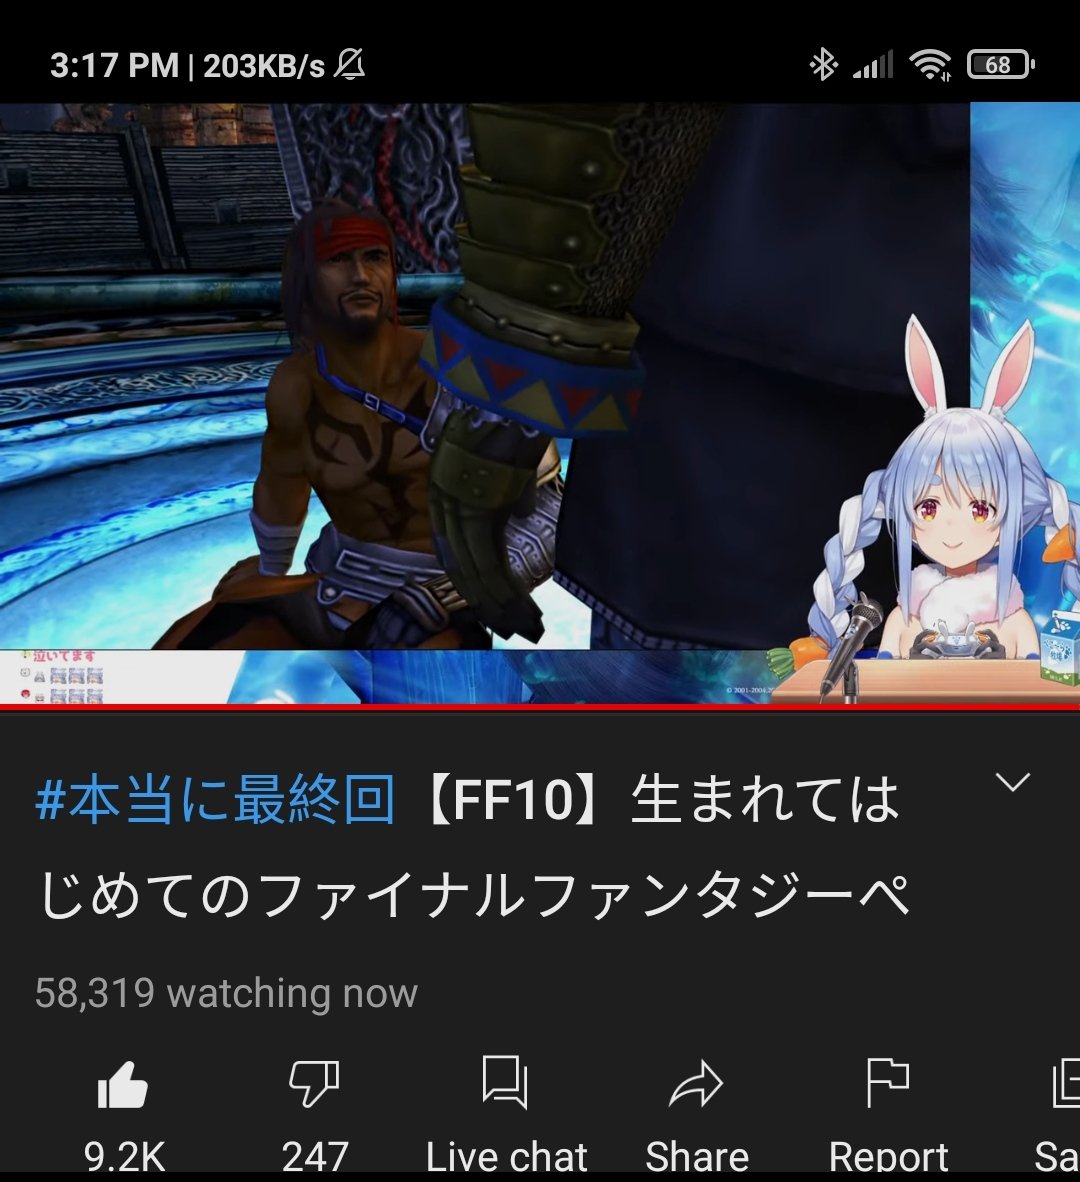 Thewhiteweaver ぺこらいぶ 60k Nousagis Watching Pekora On The Last Boss Of Ffx For Her First Final Fantasy She Did A Pretty Damn Good Job Overall She Was Still Underleveled